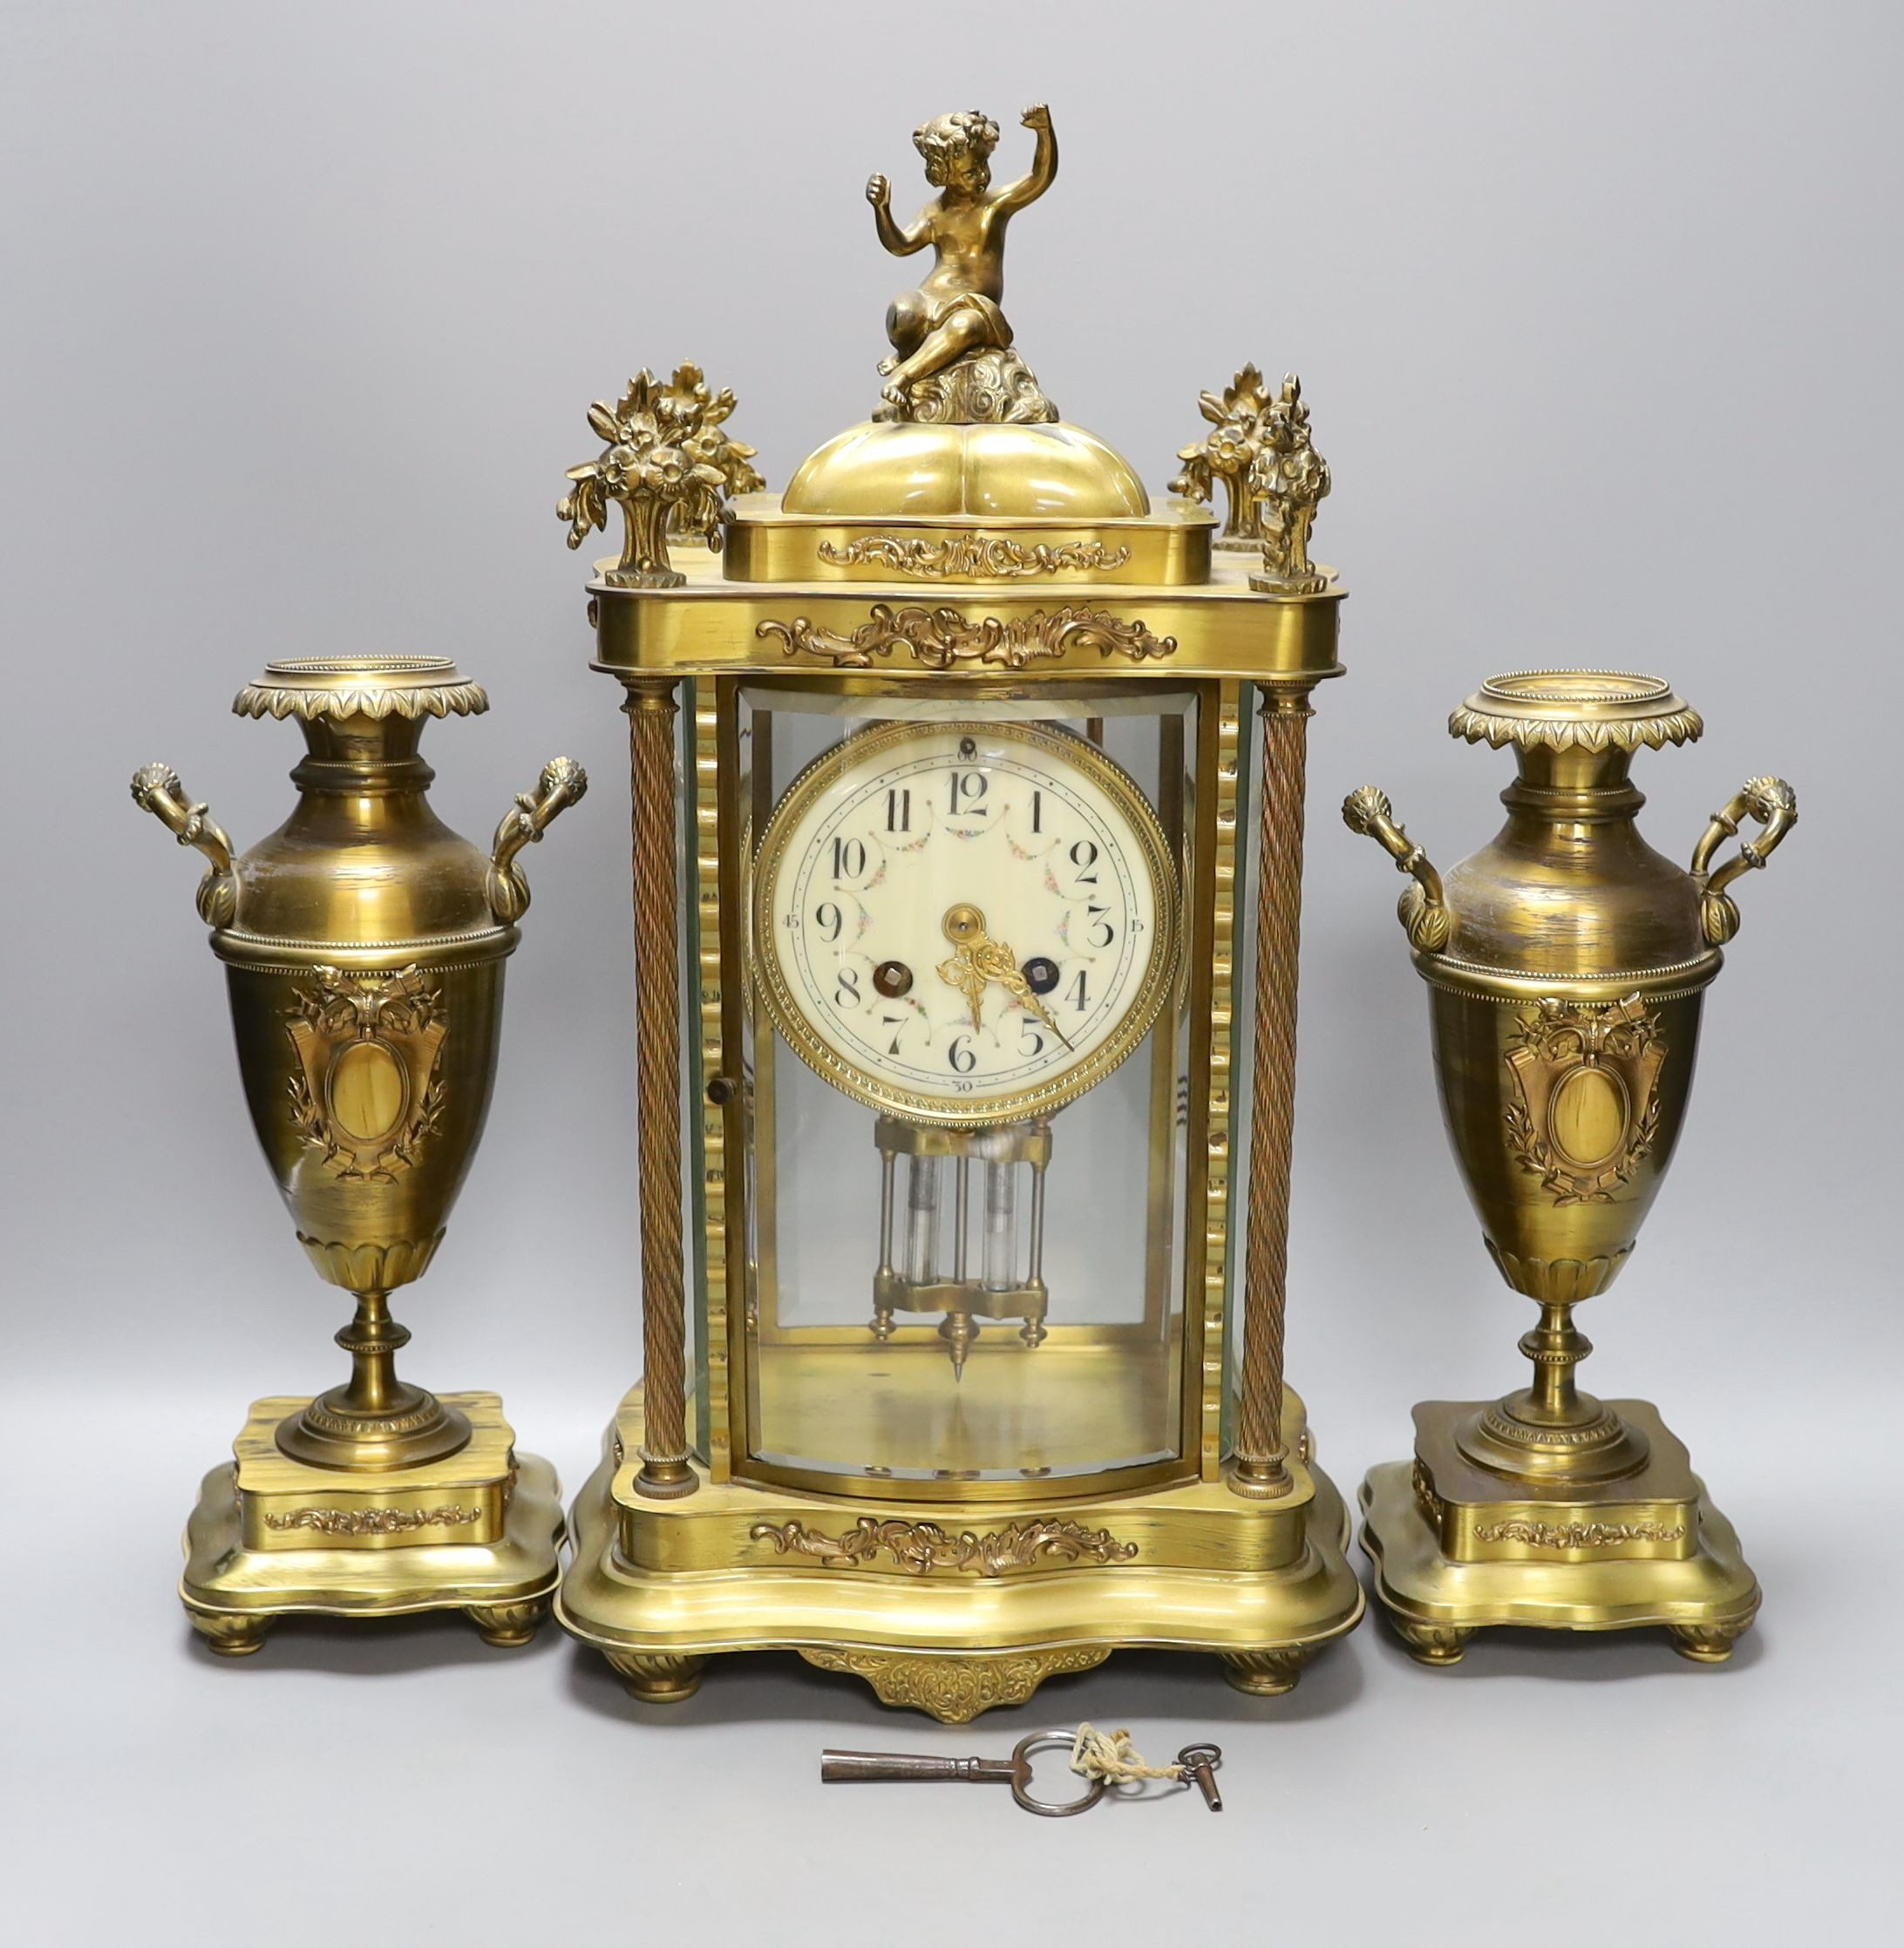 A late 19th century French brass four glass mantel clock garniture with key and pendulum, 41cm tall